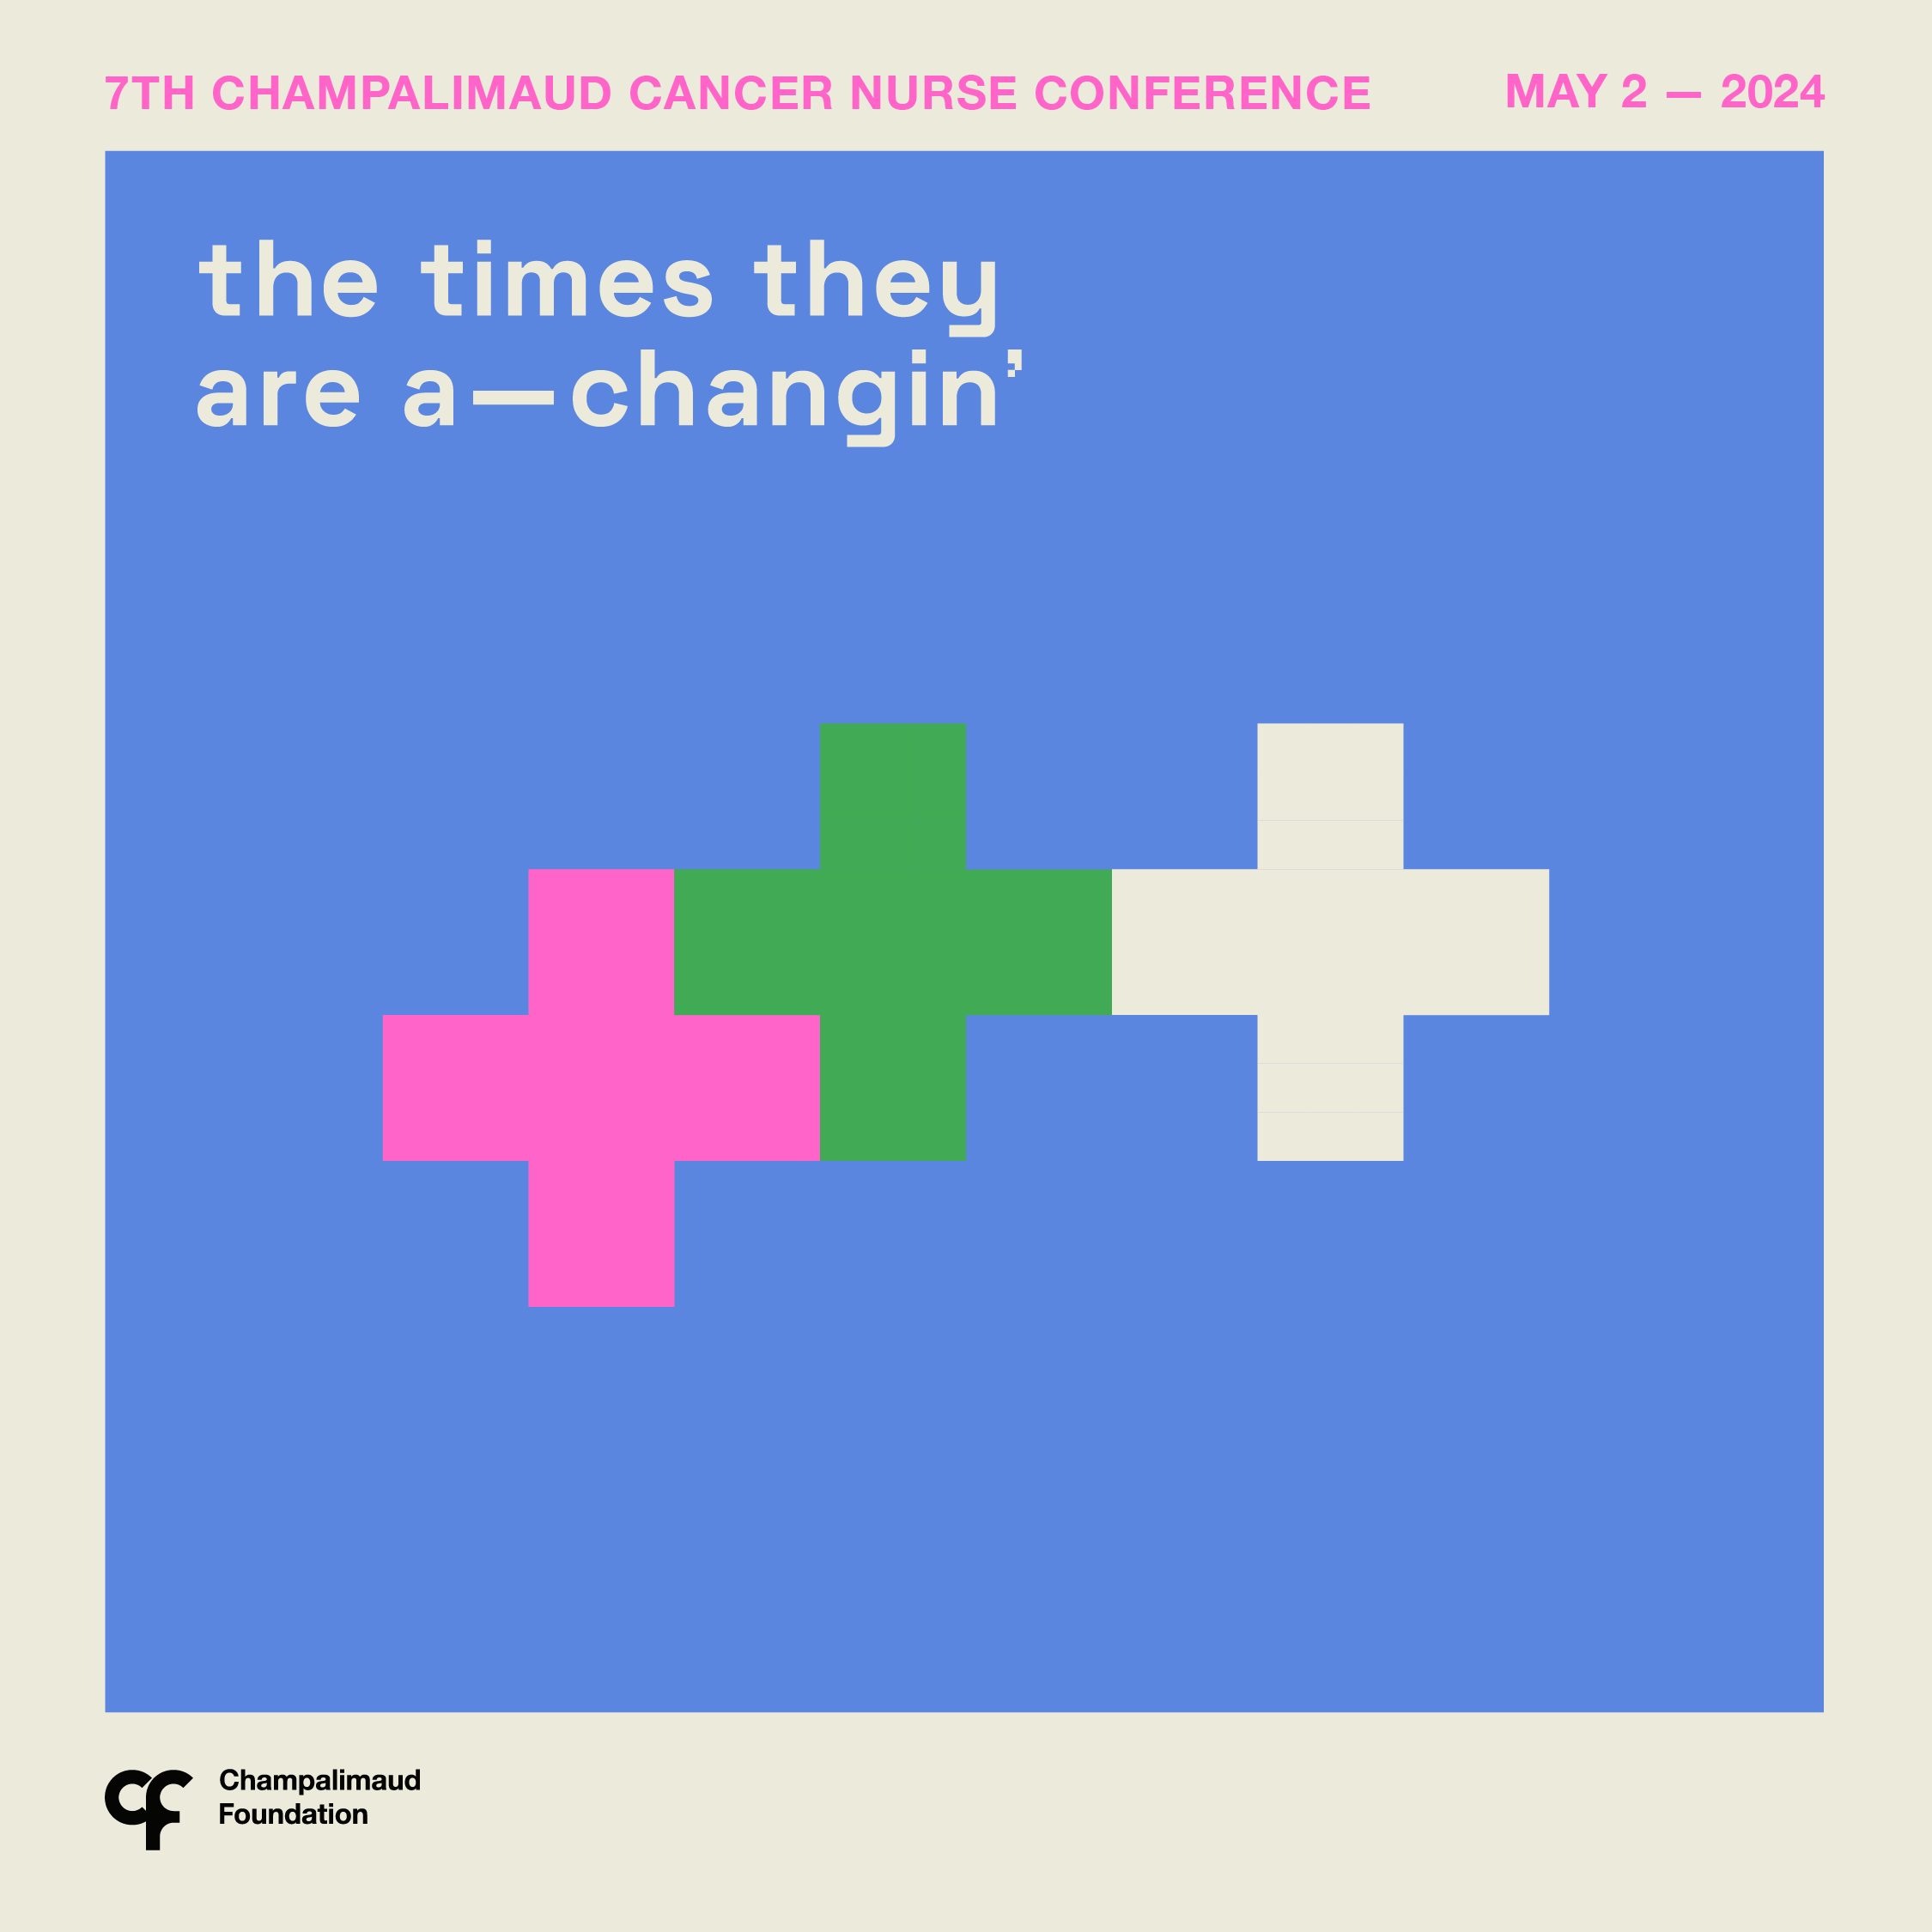 7th Champalimaud Cancer Nurse Conference: The Times They Are A-Changin'